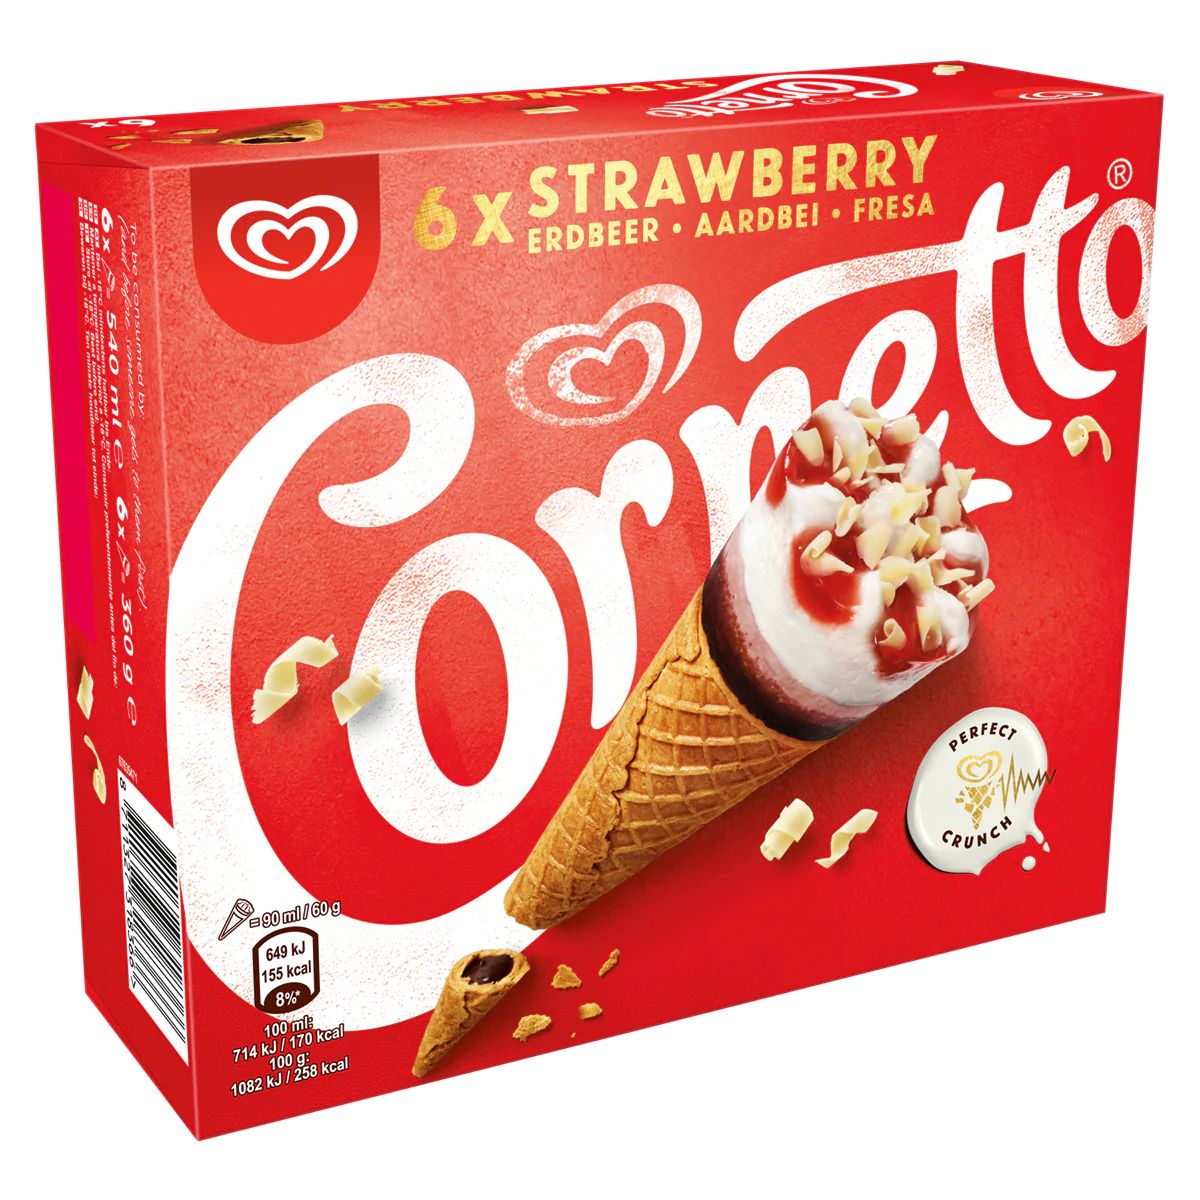 A box of Walls - Cornetto Strawberry - 6 Pieces containing 5 pieces.